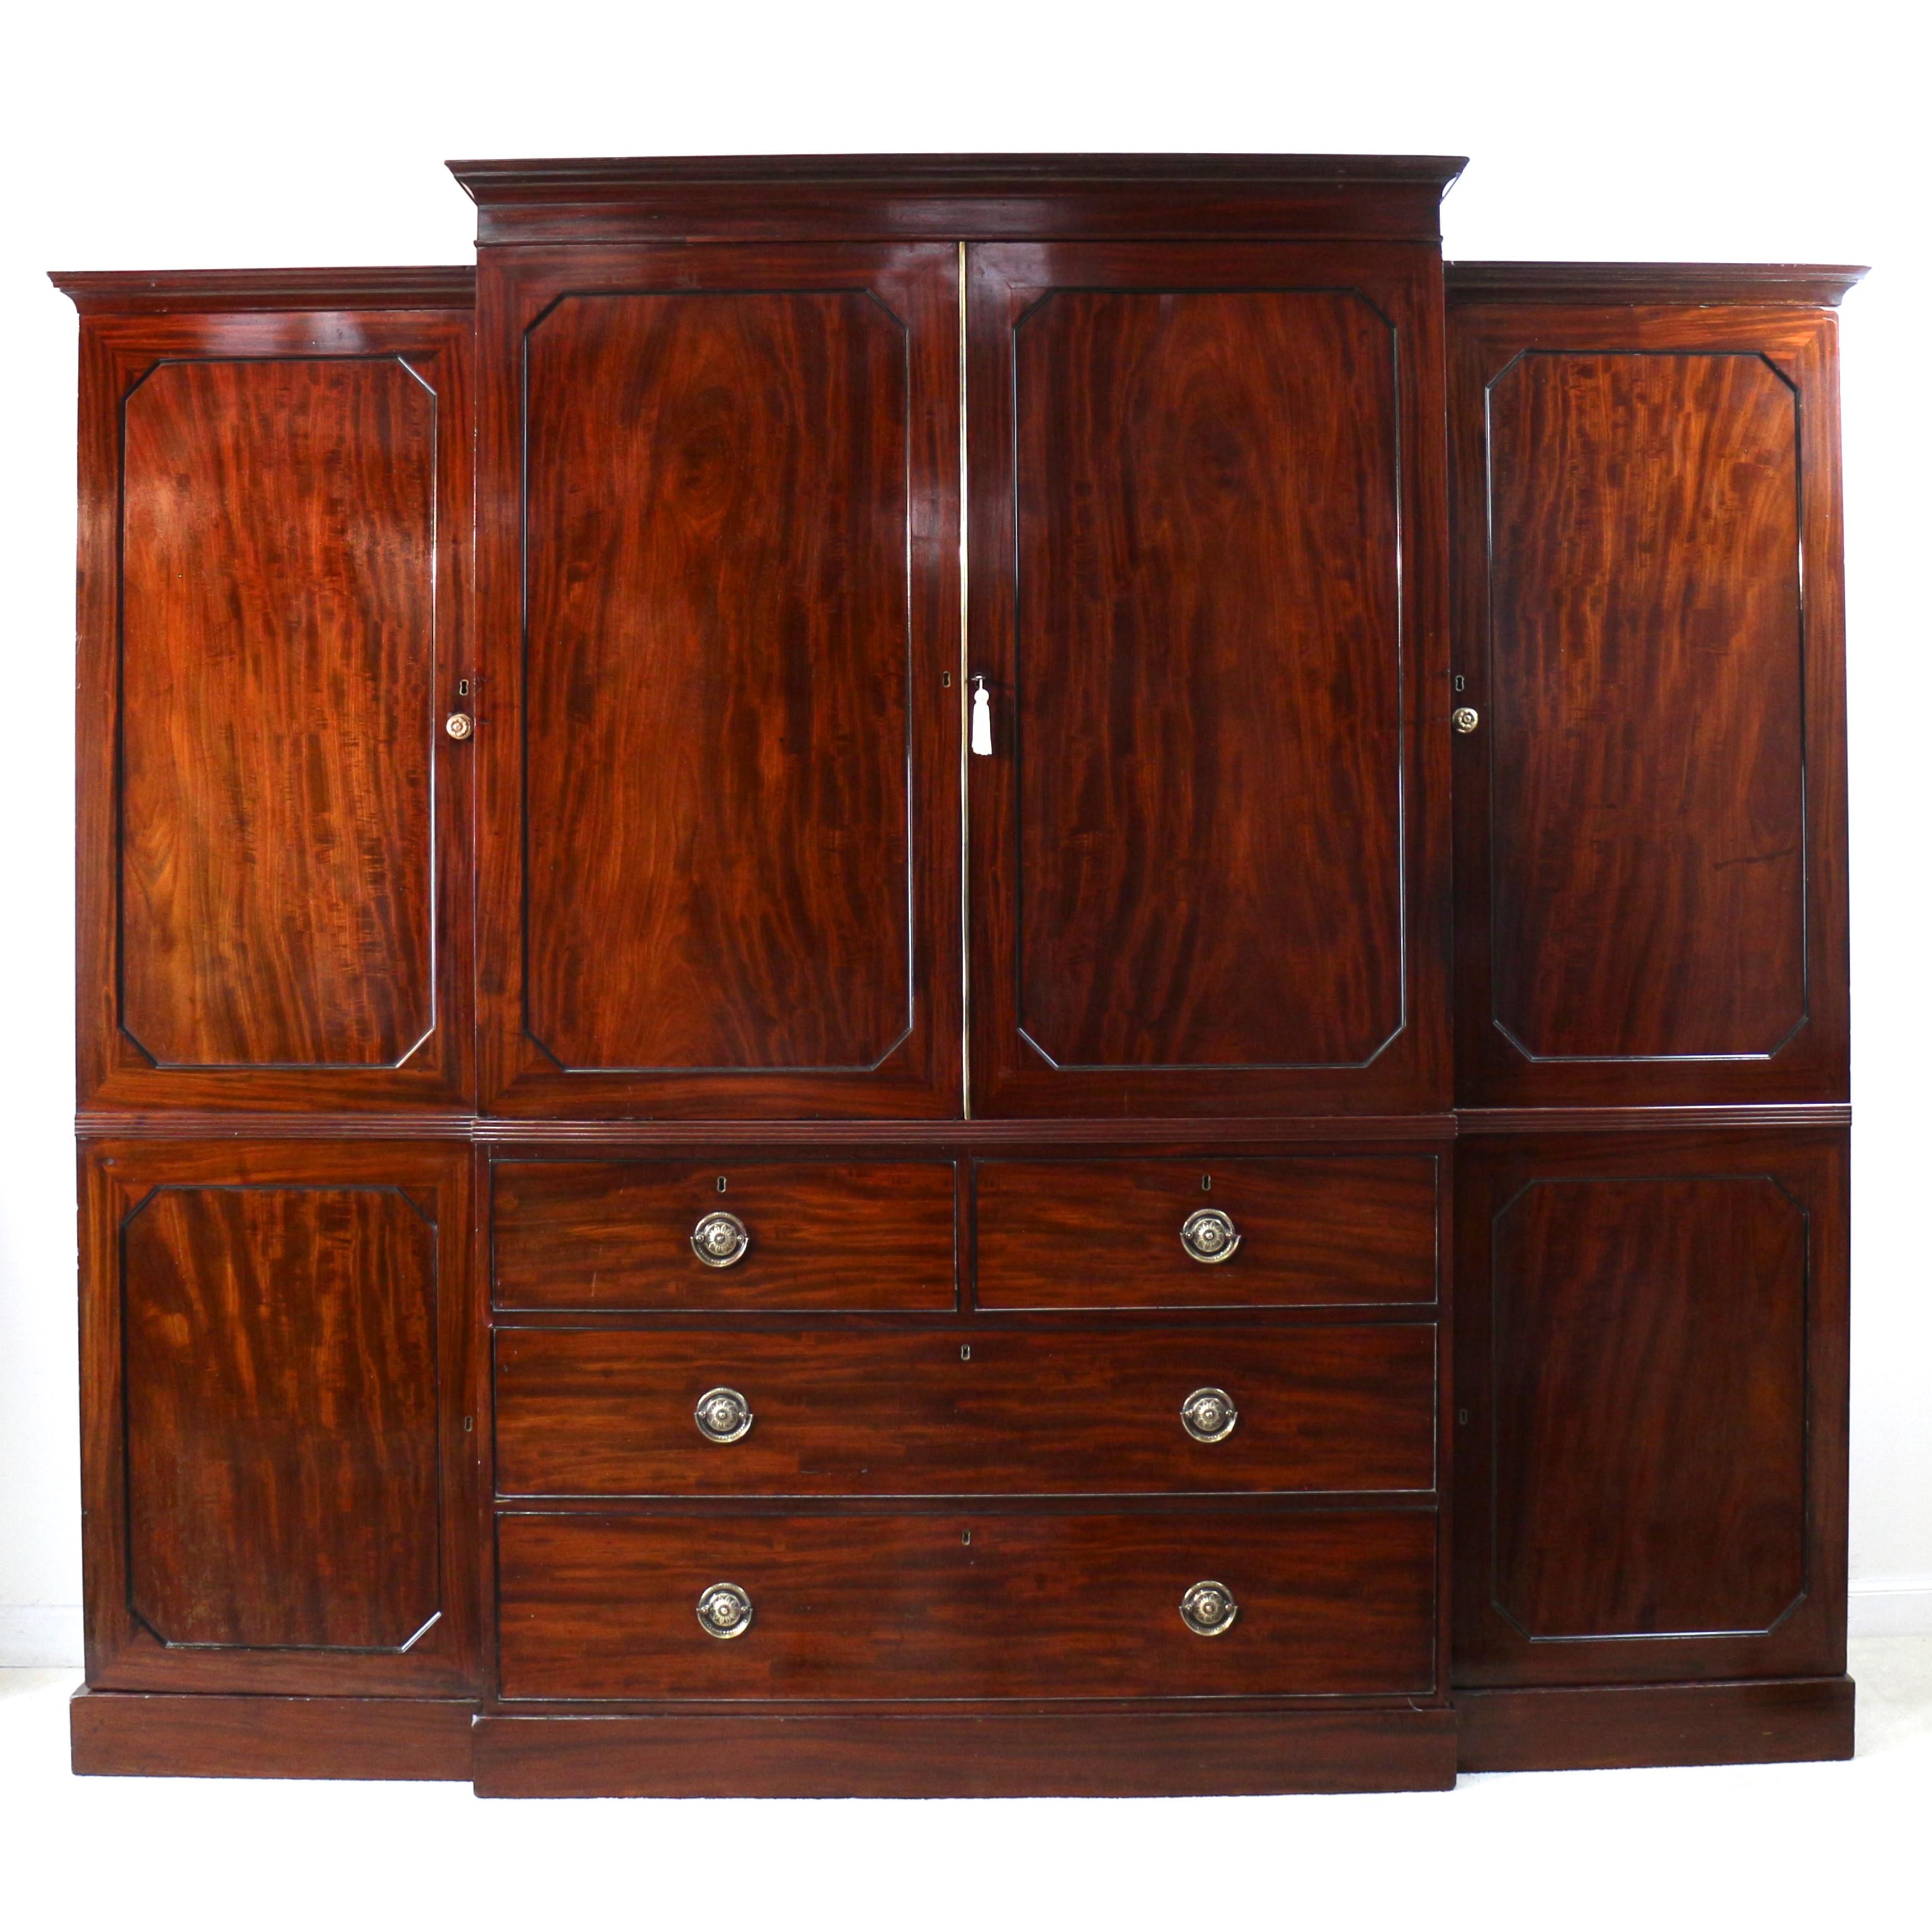 A superb quality and impressive Regency breakfront flame mahogany gentleman’s linen press wardrobe dating to circa 1820 and attributable to Gillows of Lancaster. Featuring a stepped moulded cornice above a pair of projecting fielded panelled